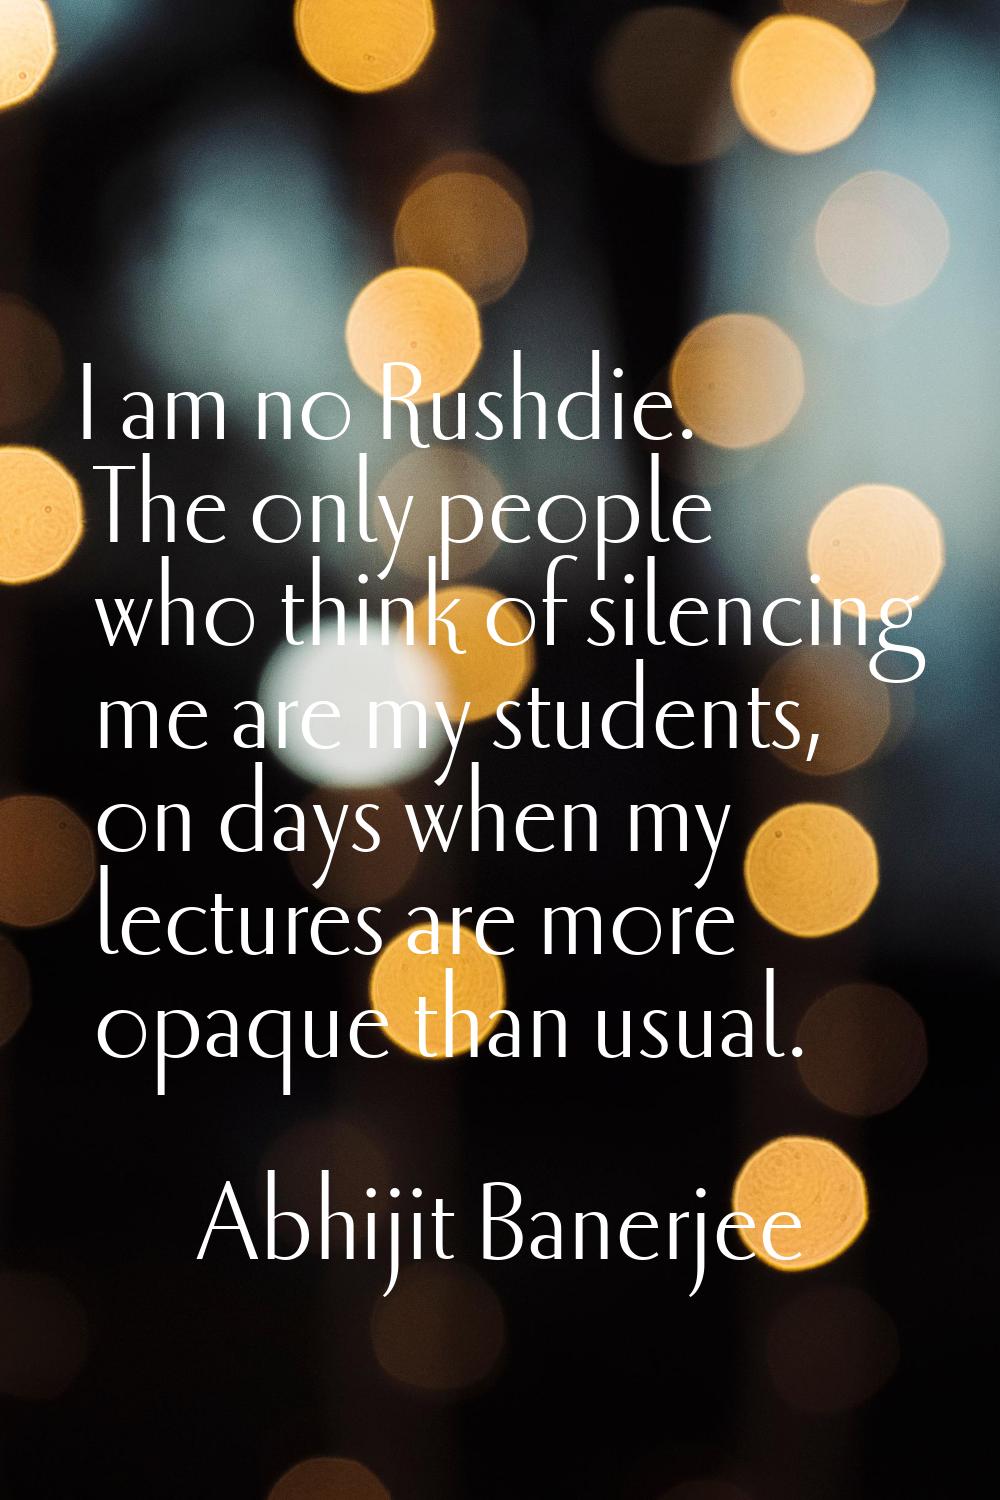 I am no Rushdie. The only people who think of silencing me are my students, on days when my lecture